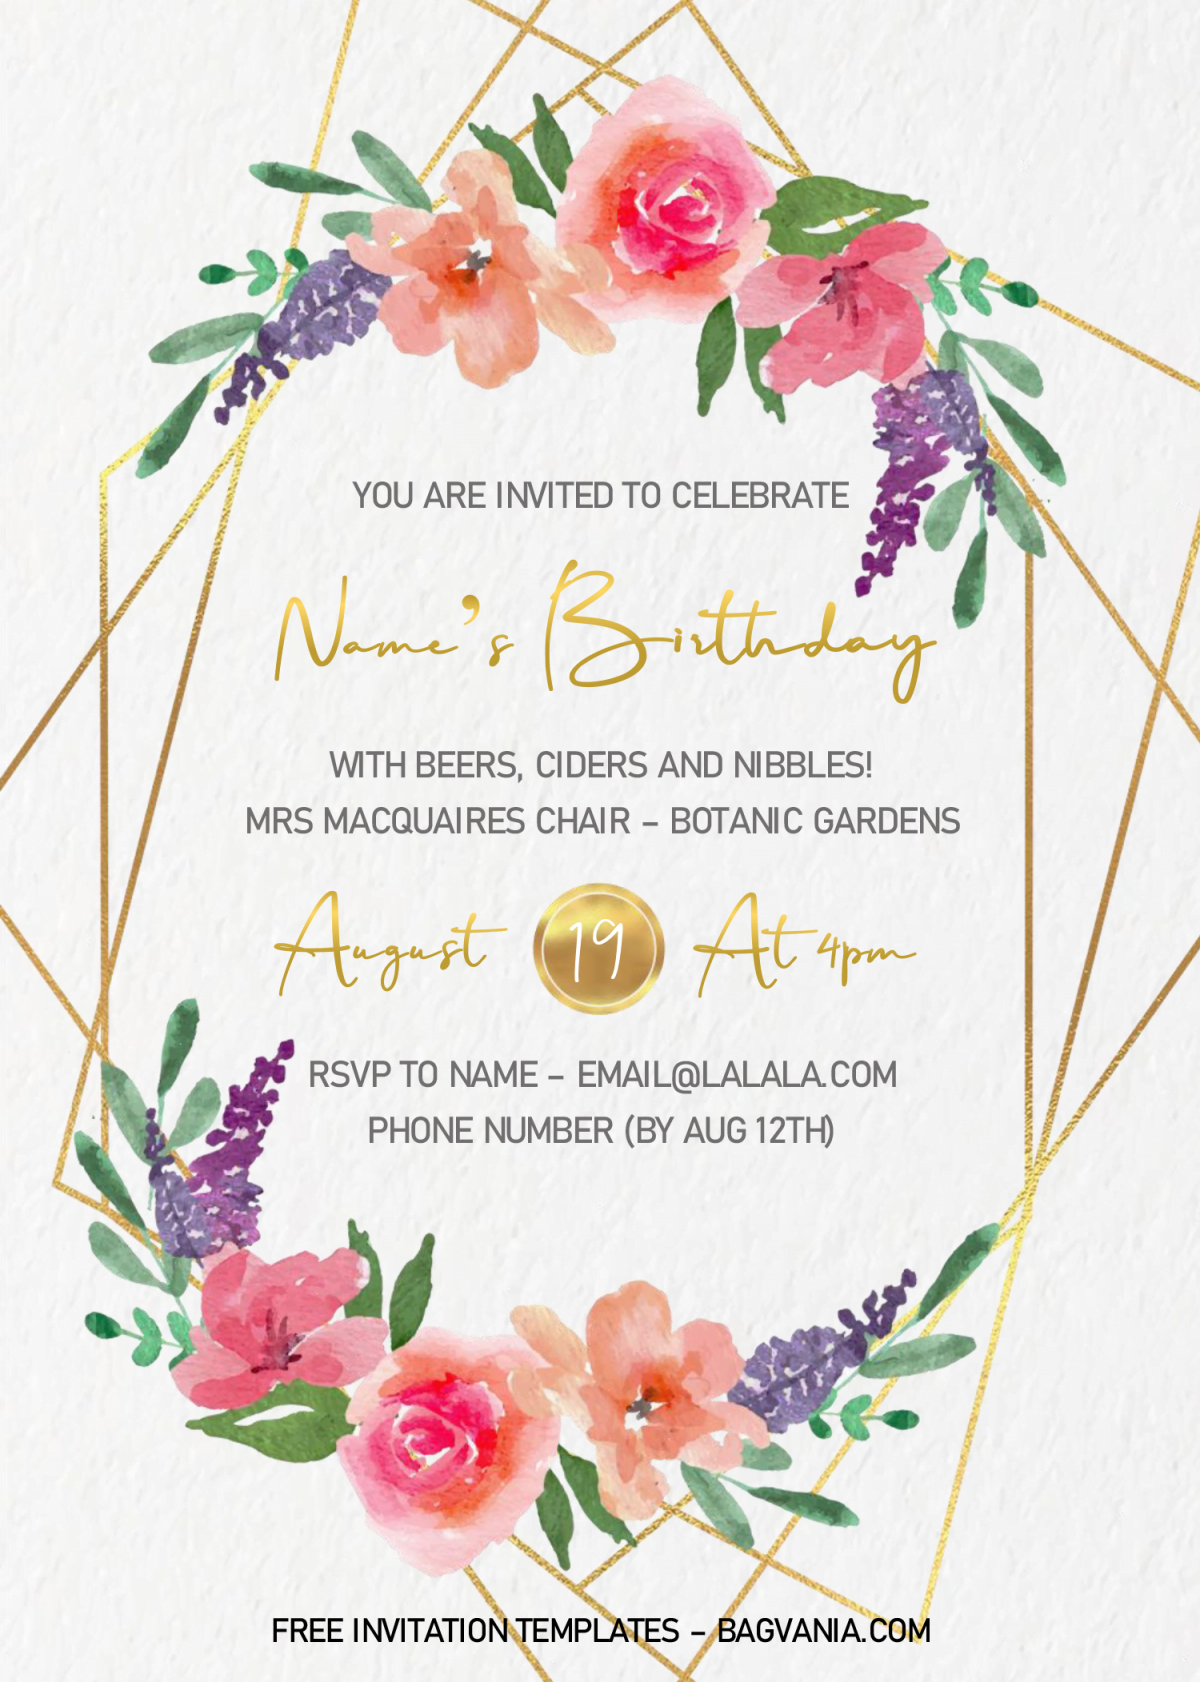 Gold Geometric Invitation Templates - Editable .Docx and has canvas background